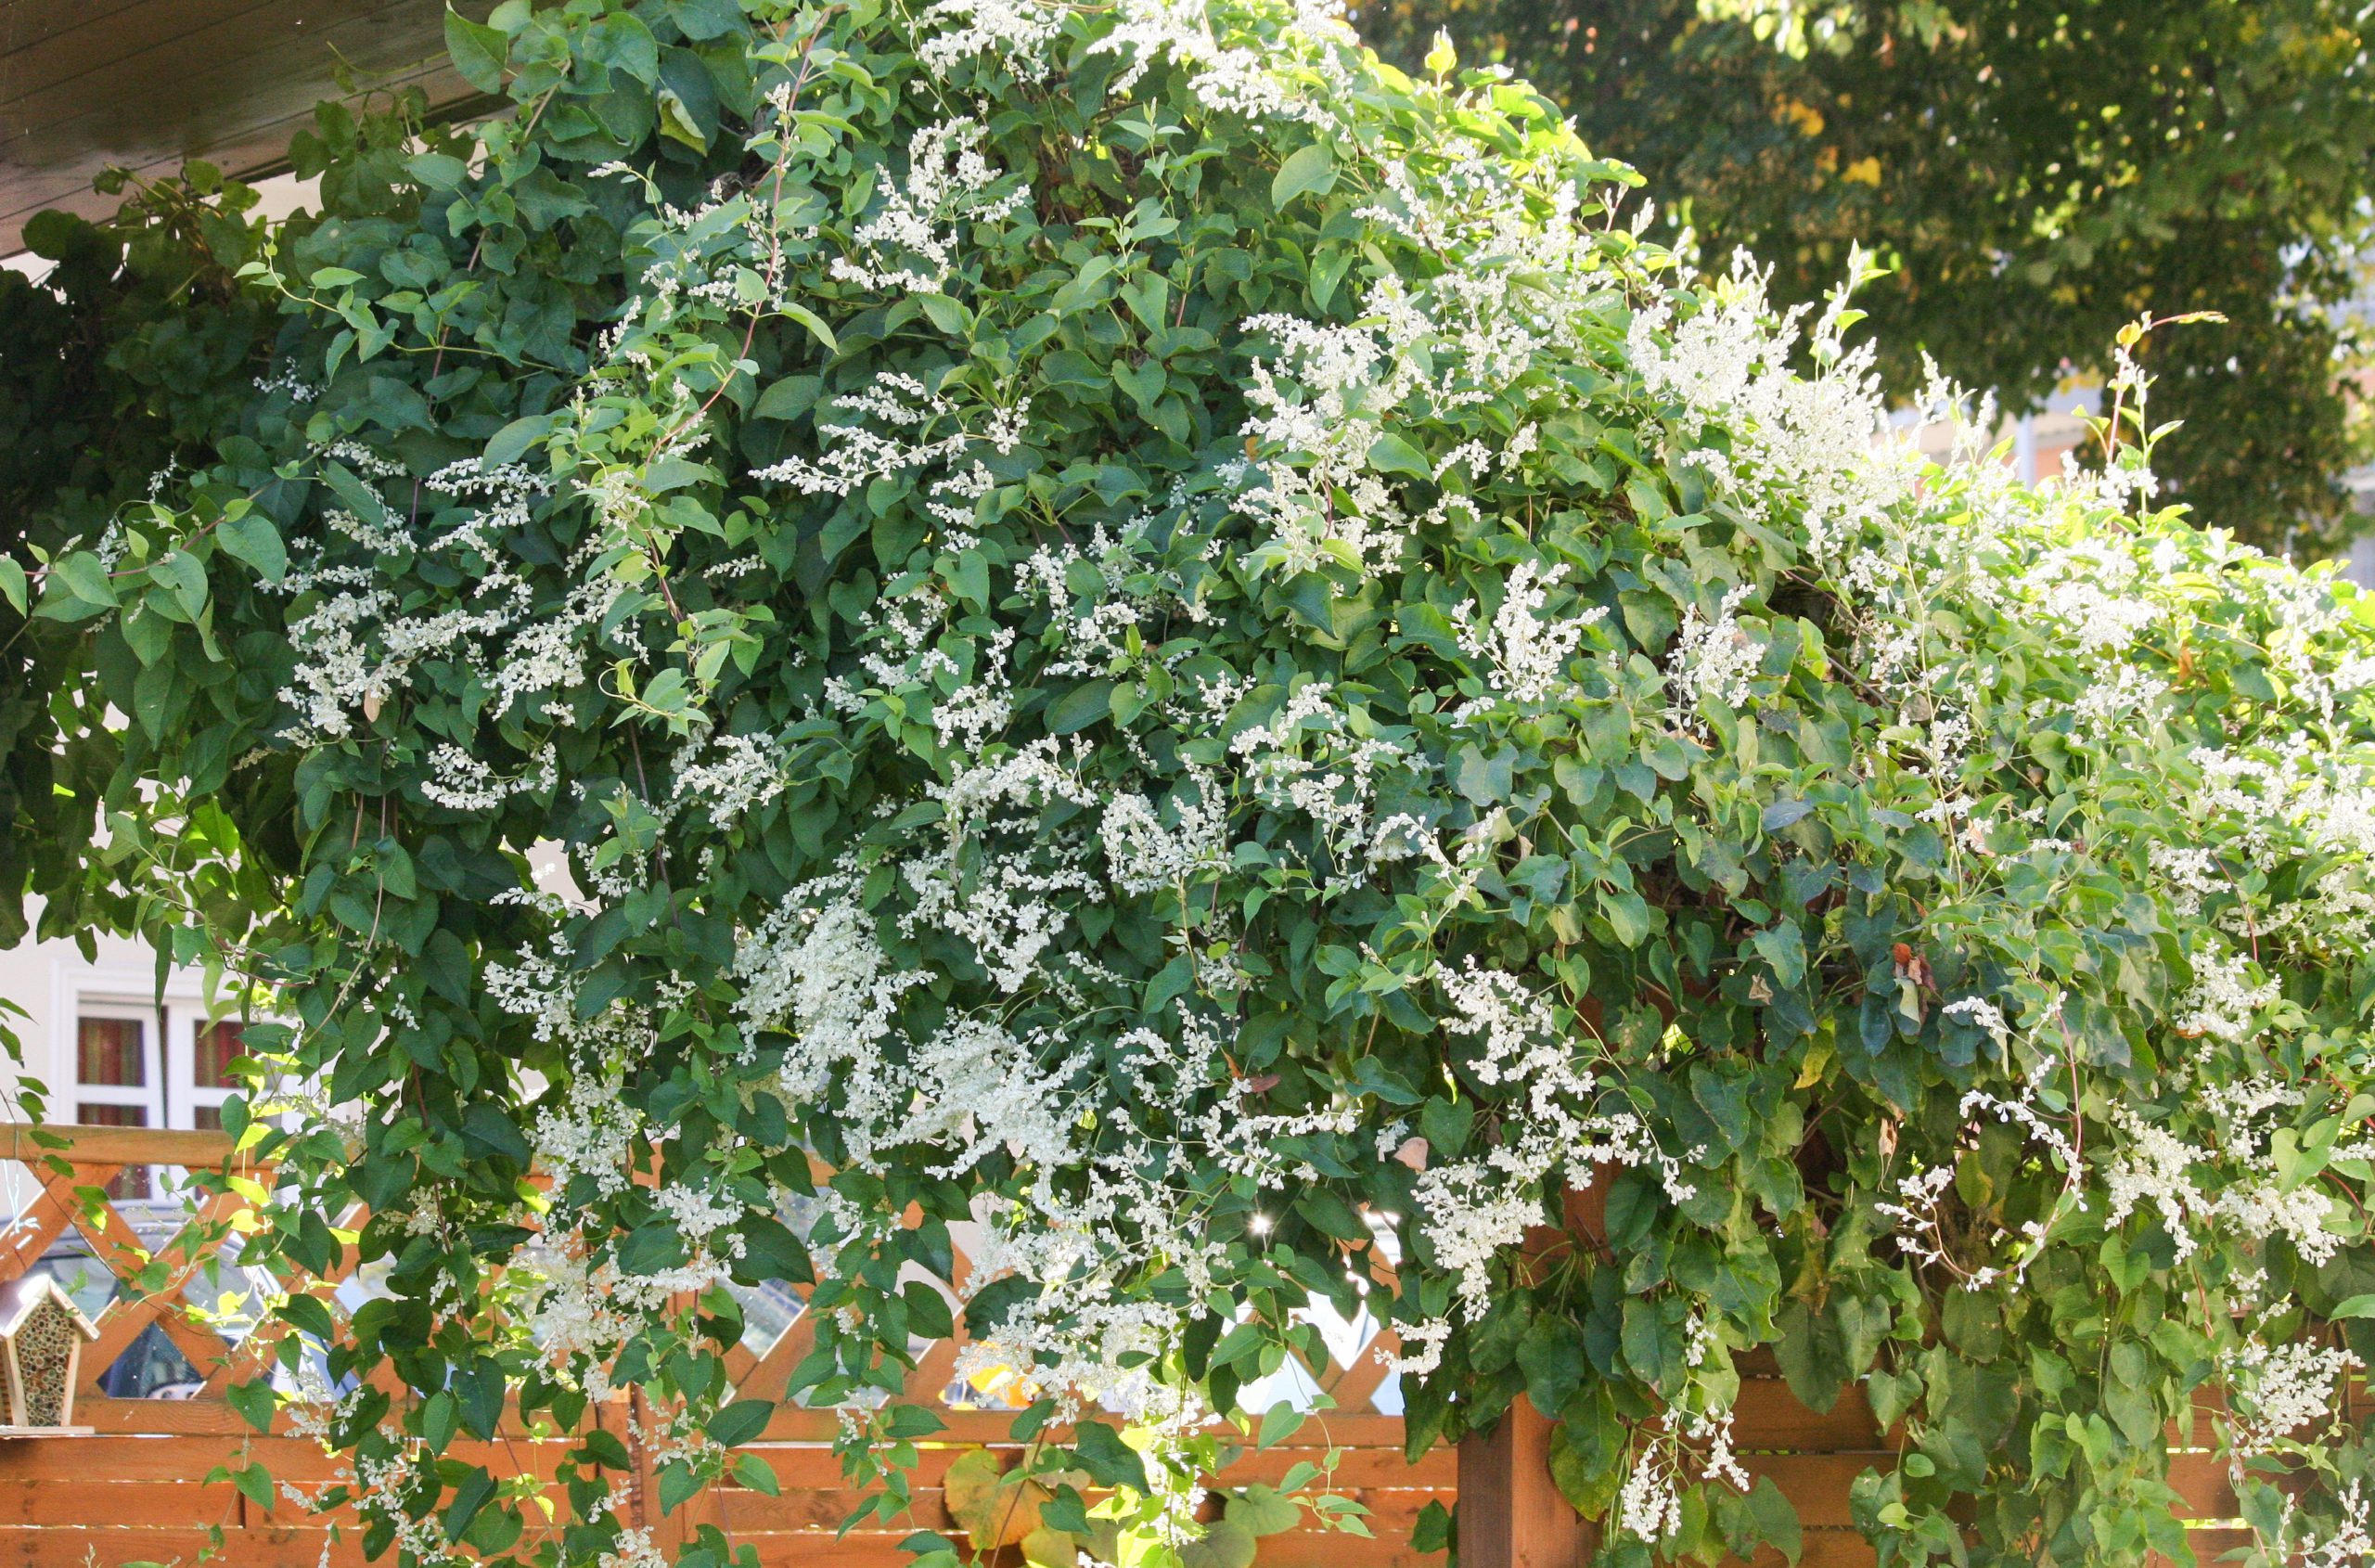 Russian Vine (Fallopia baldschuanica) doesn't grow in a similar fashion, but does have similar cream-white panicles